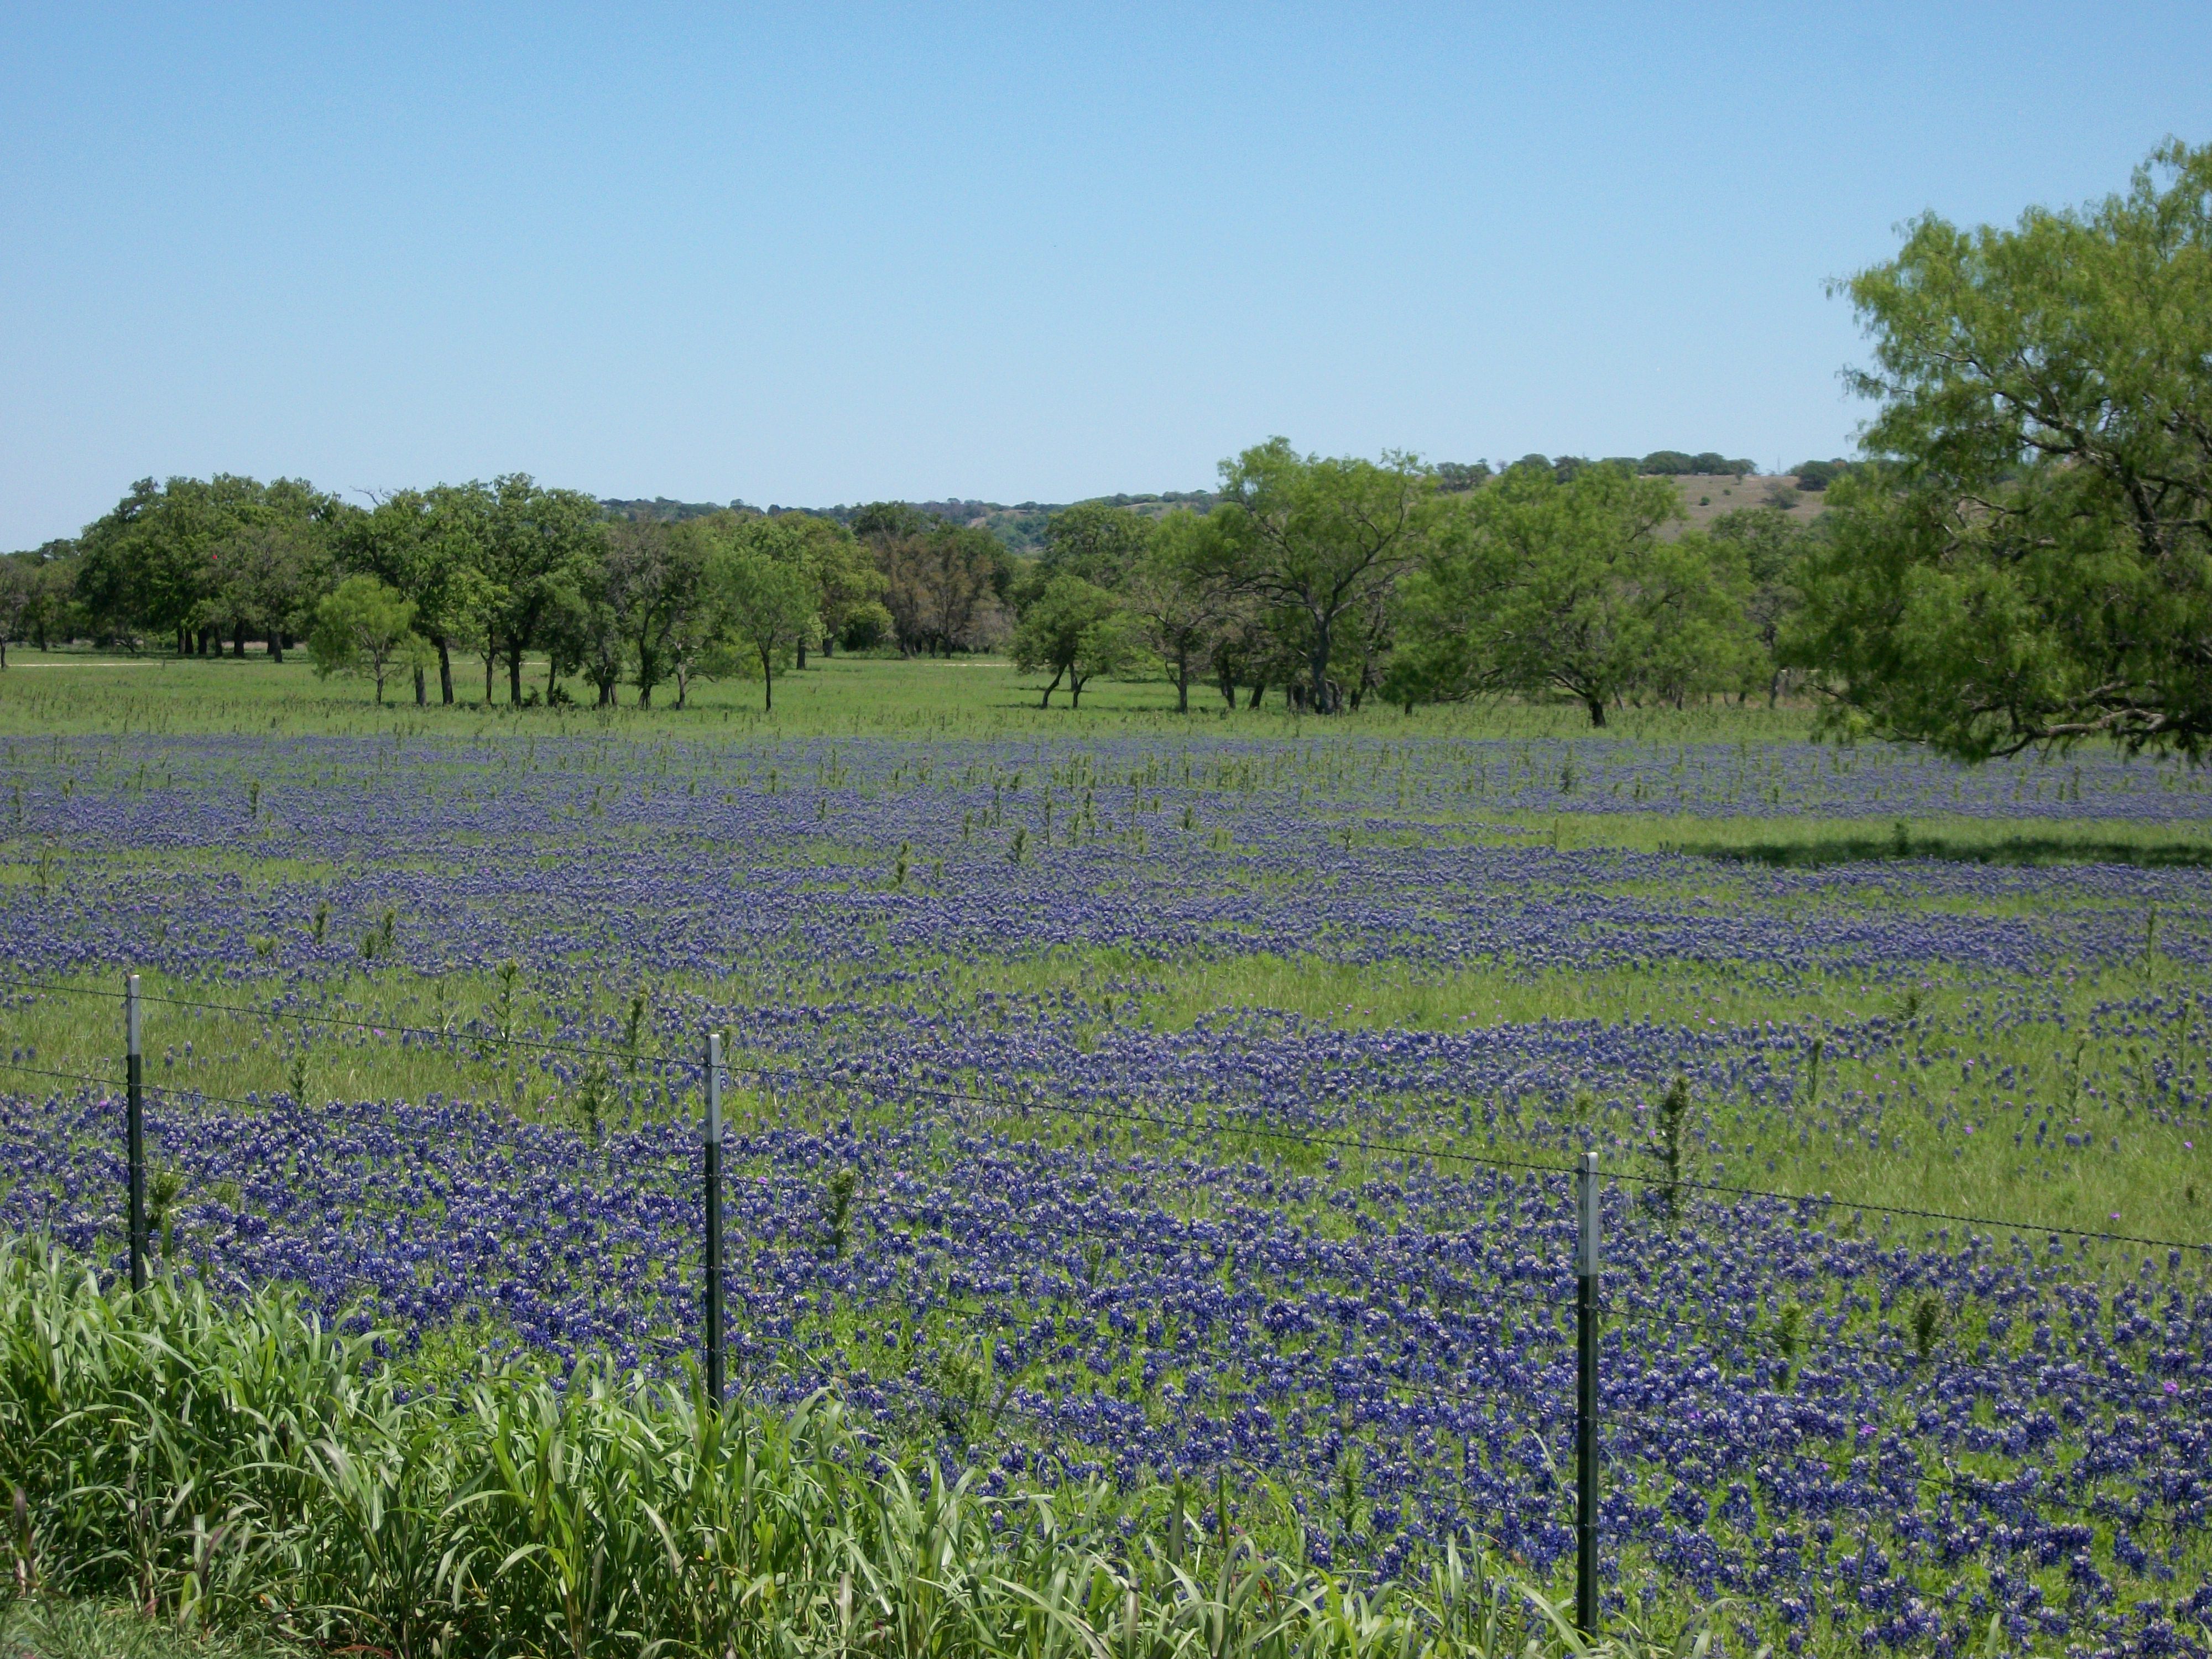 It would not be the Hill Country w/o bluebonnets